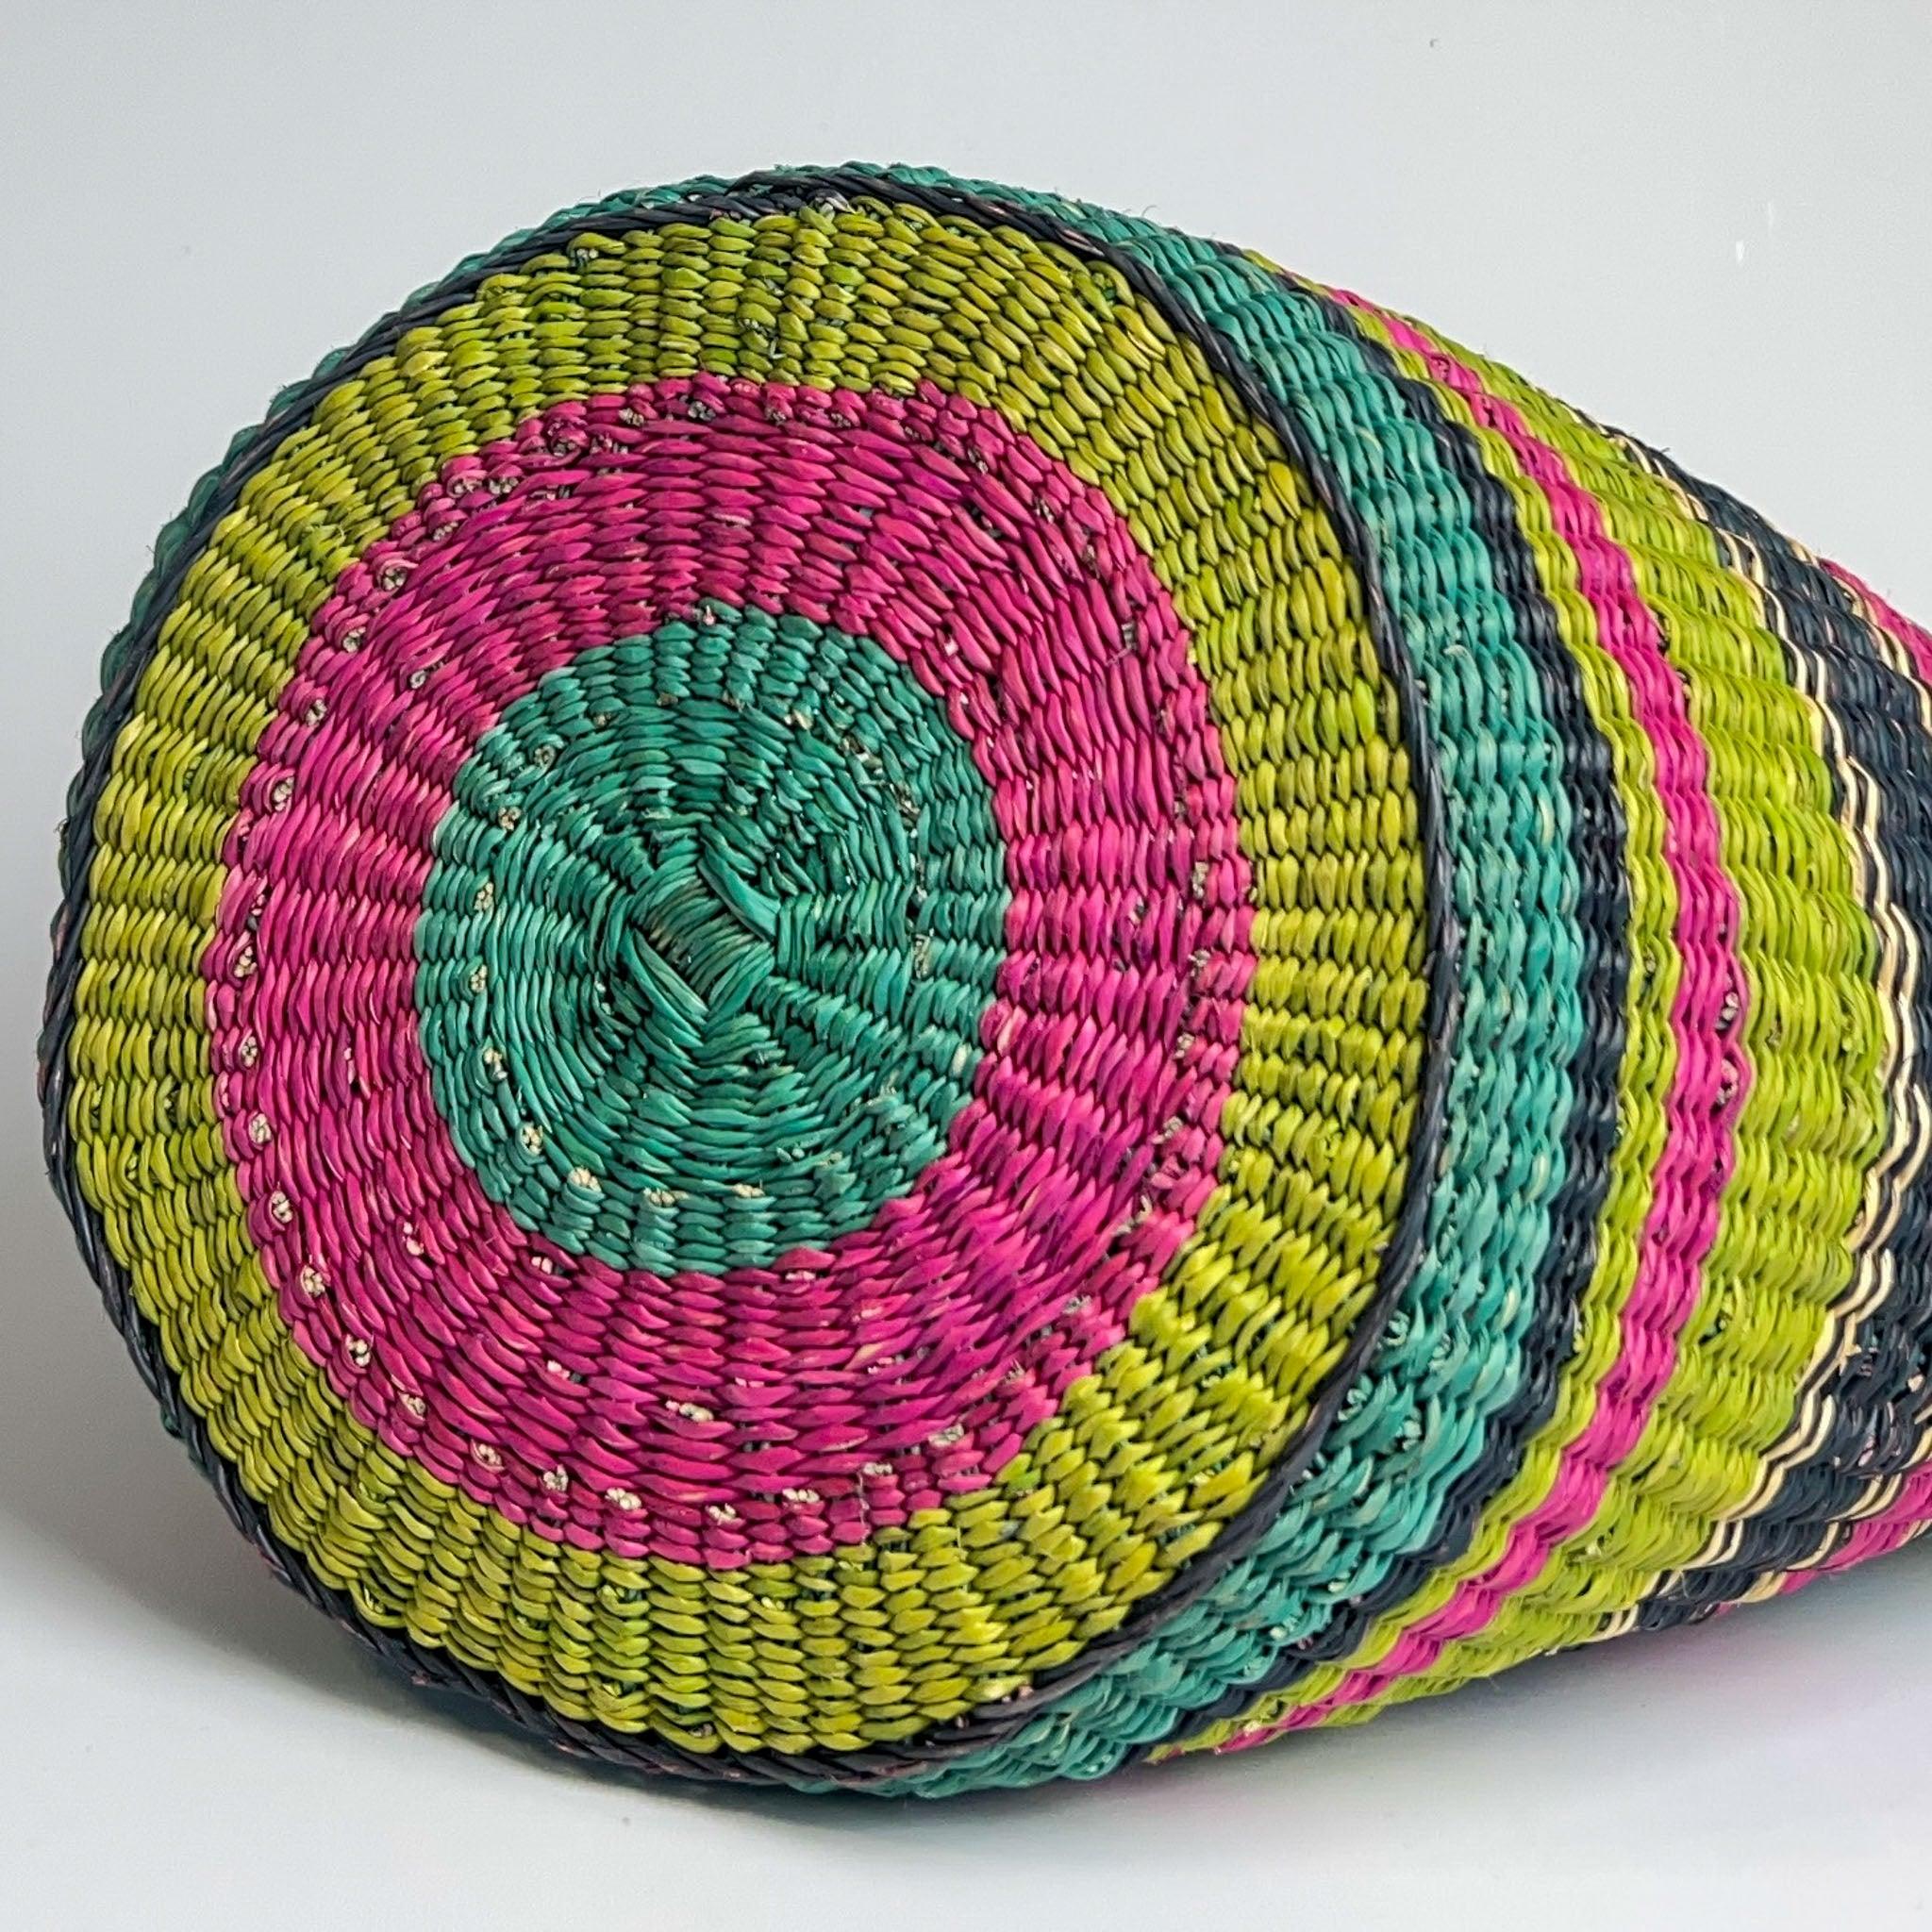 African shopper basket on it's side showing off a circular stripe design in bright pink, blue and lime green.